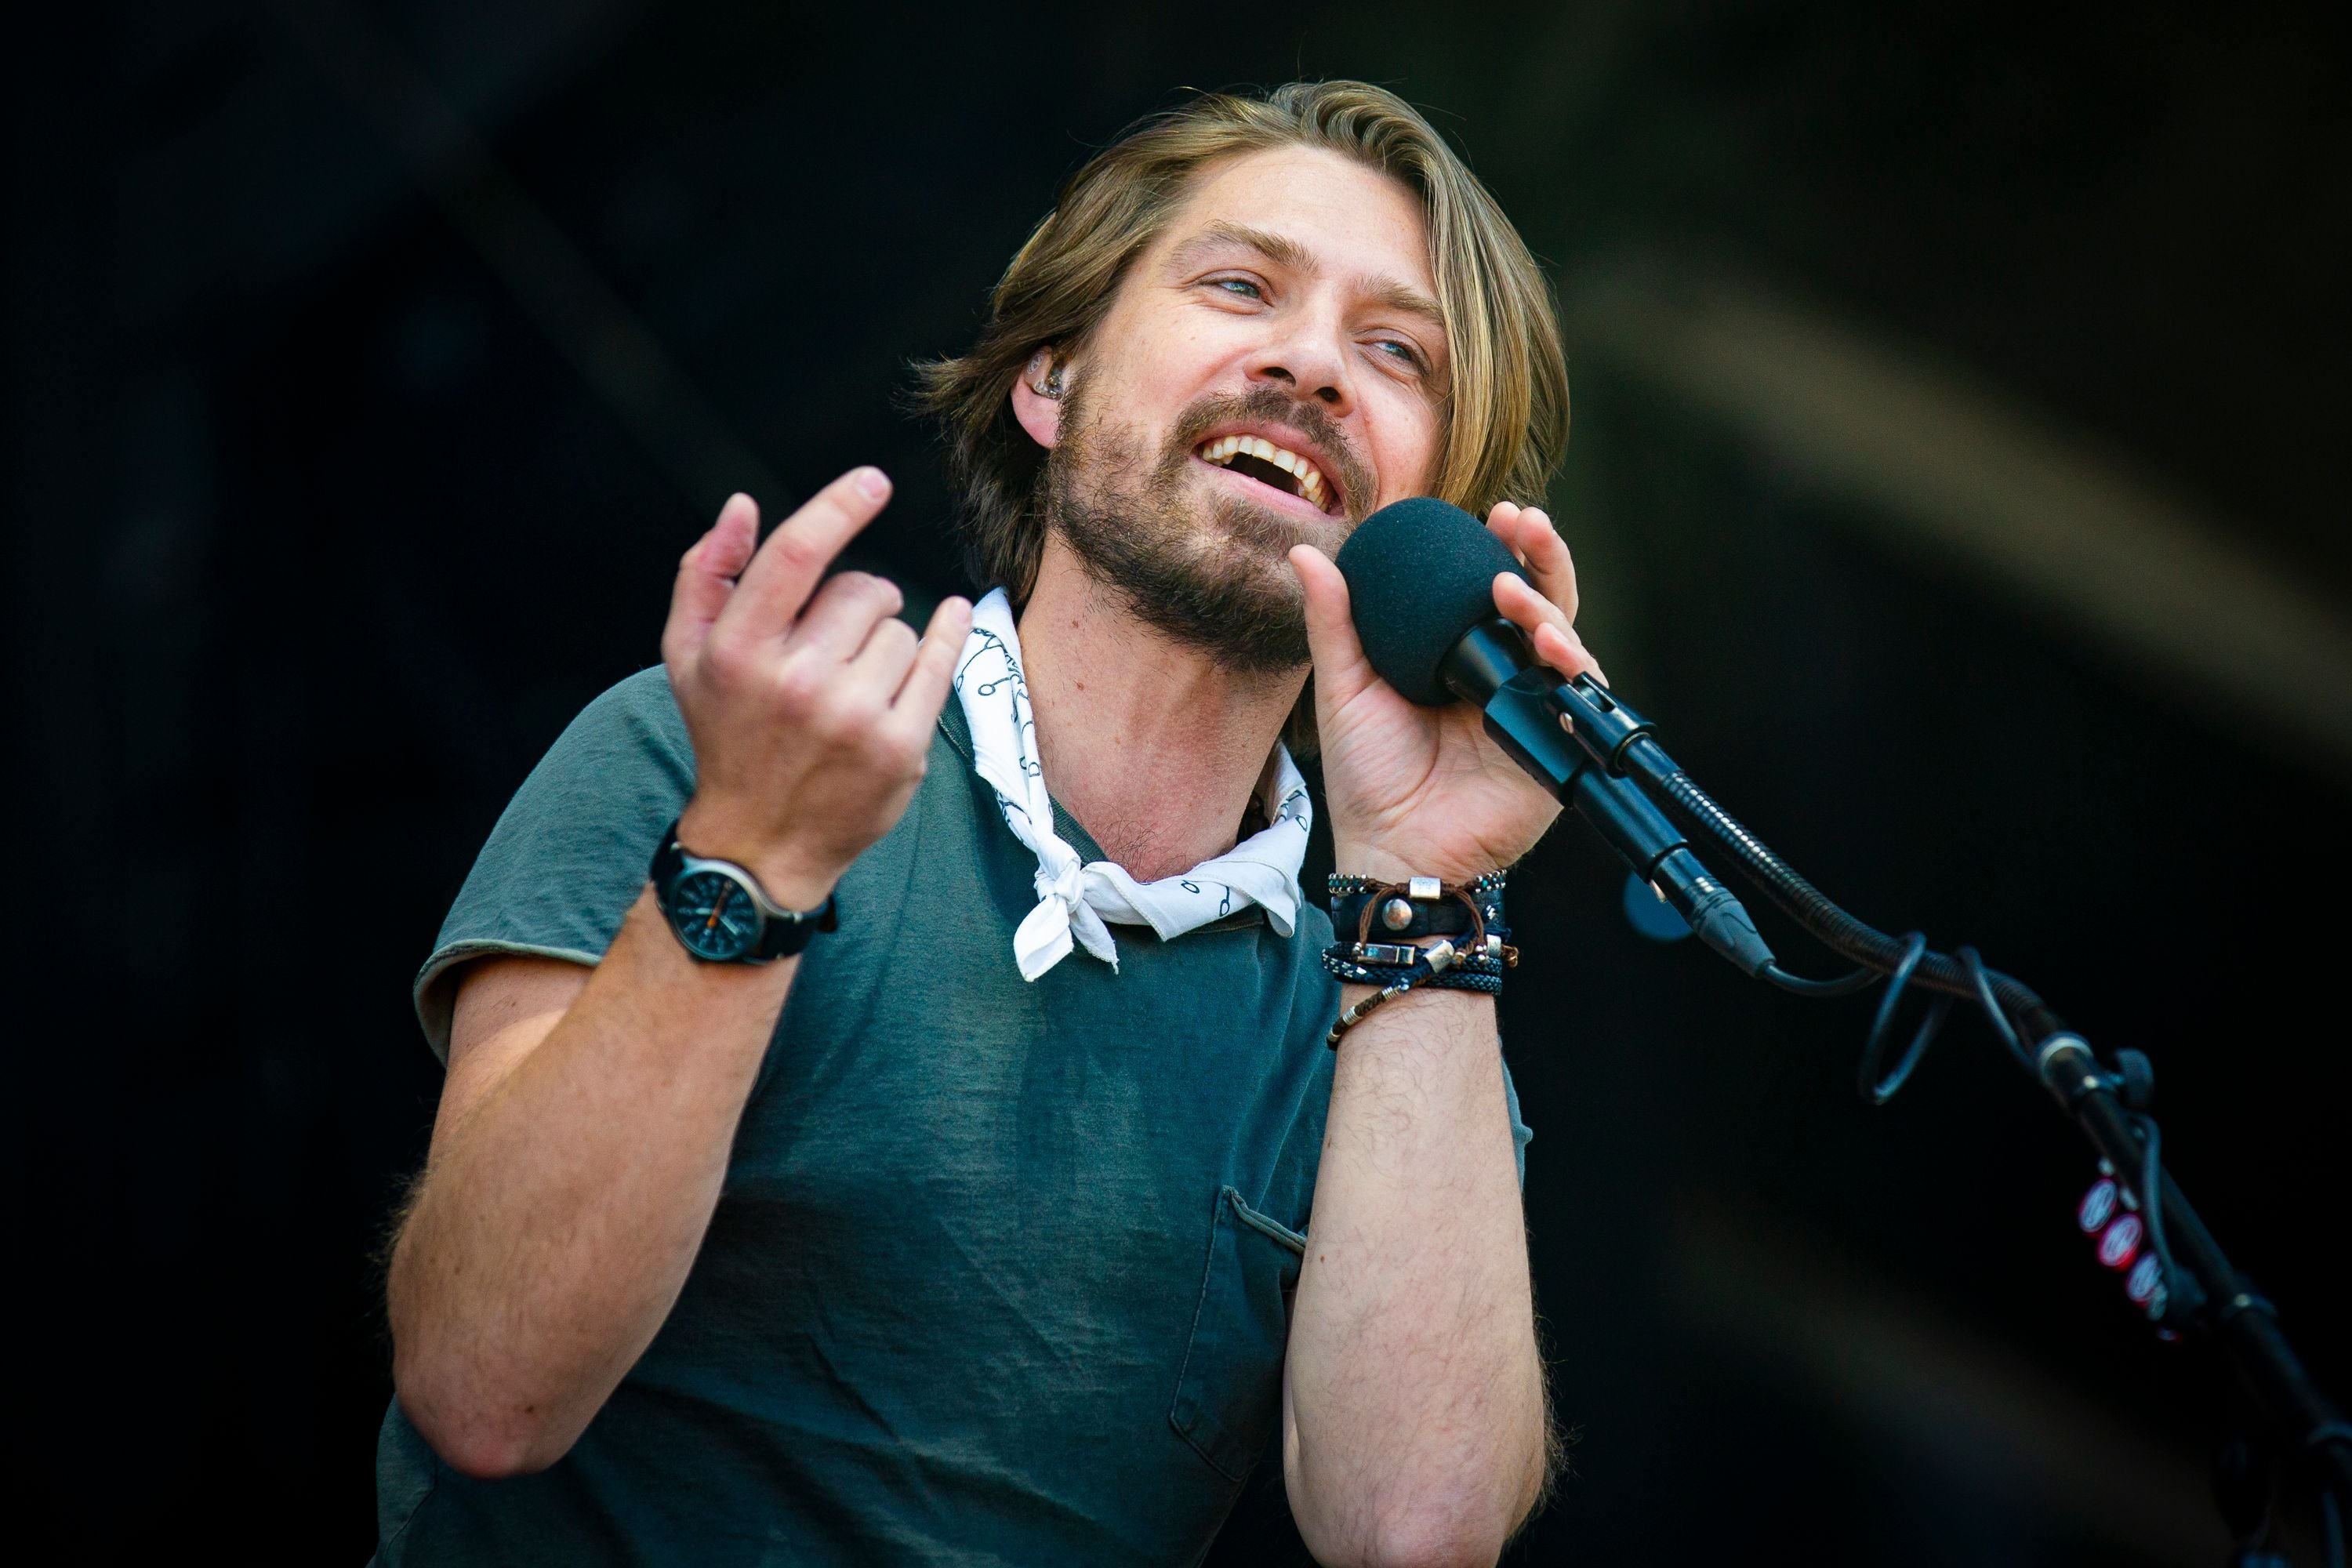 Taylor Hanson of Hanson performs at the RBC Bluesfest at LeBreton Flats on July 6, 2018 | Photo: Getty Images